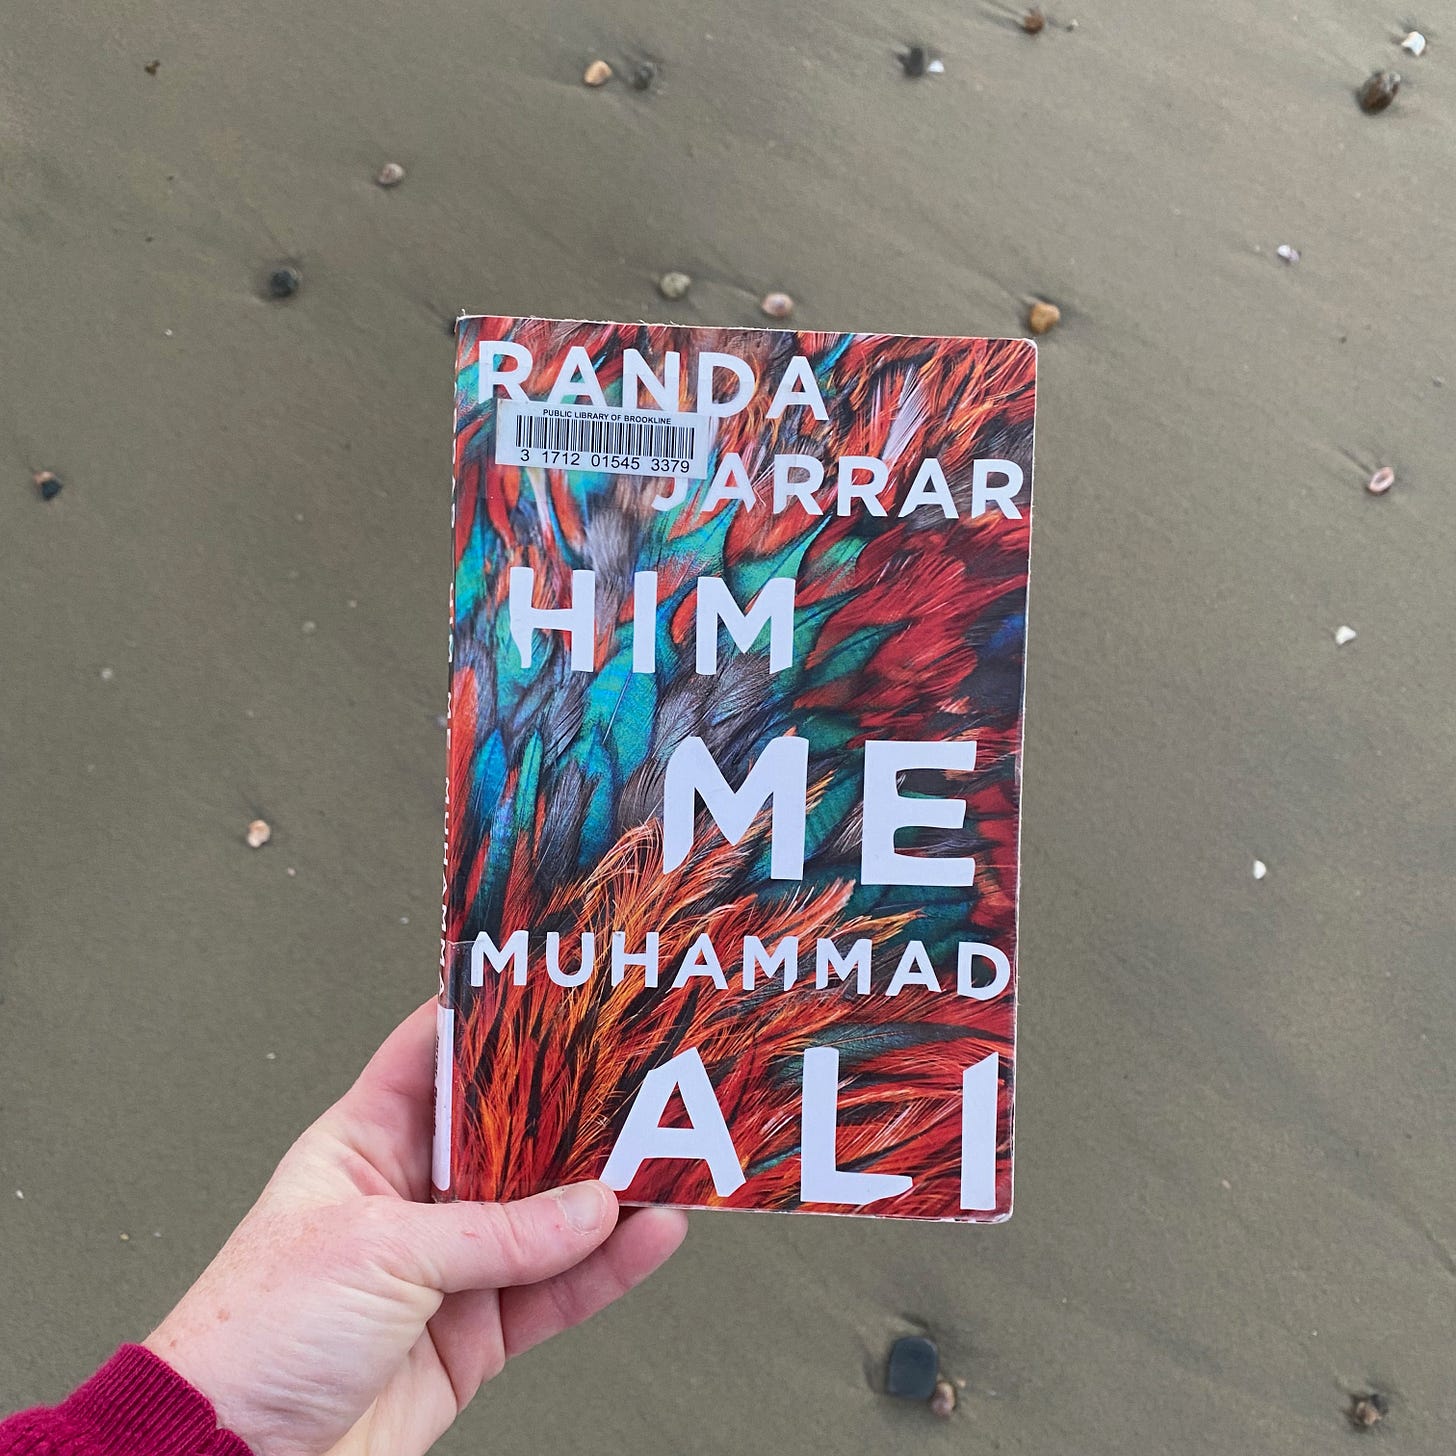 I’m holding Him, Me, Muhammad Ali above a sandy beach scattered with small stones and shells.